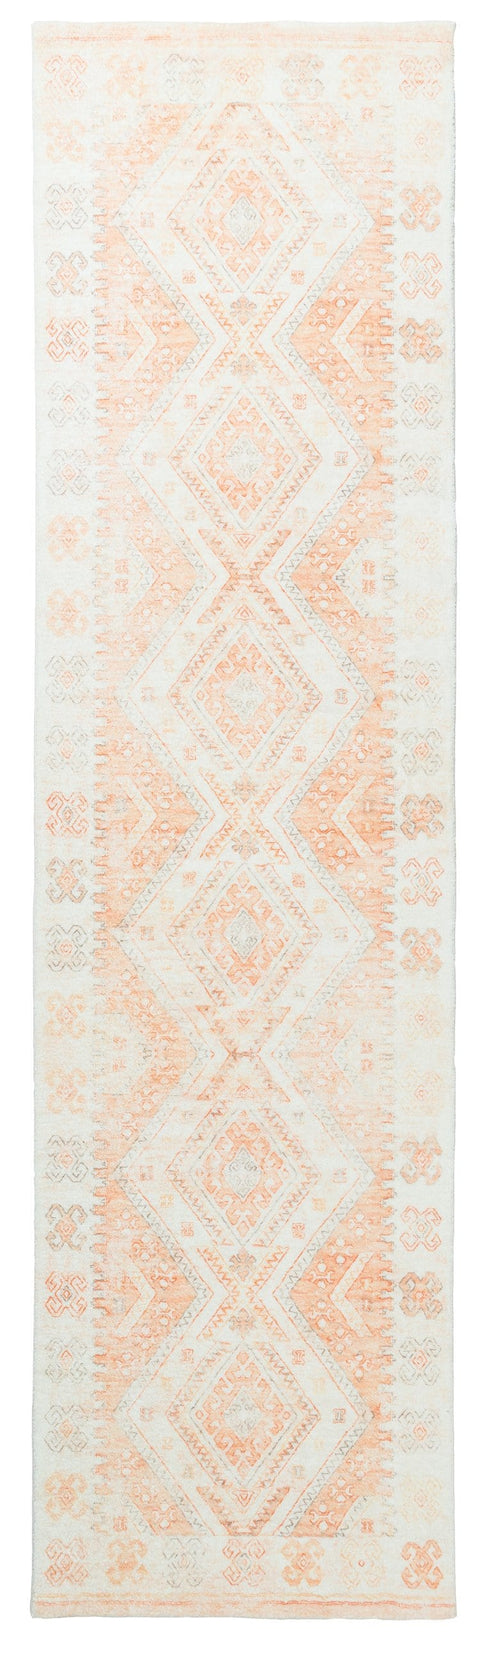 Dayanna Orange and Cream Tribal Washable Runner Rug *NO RETURNS UNLESS FAULTY